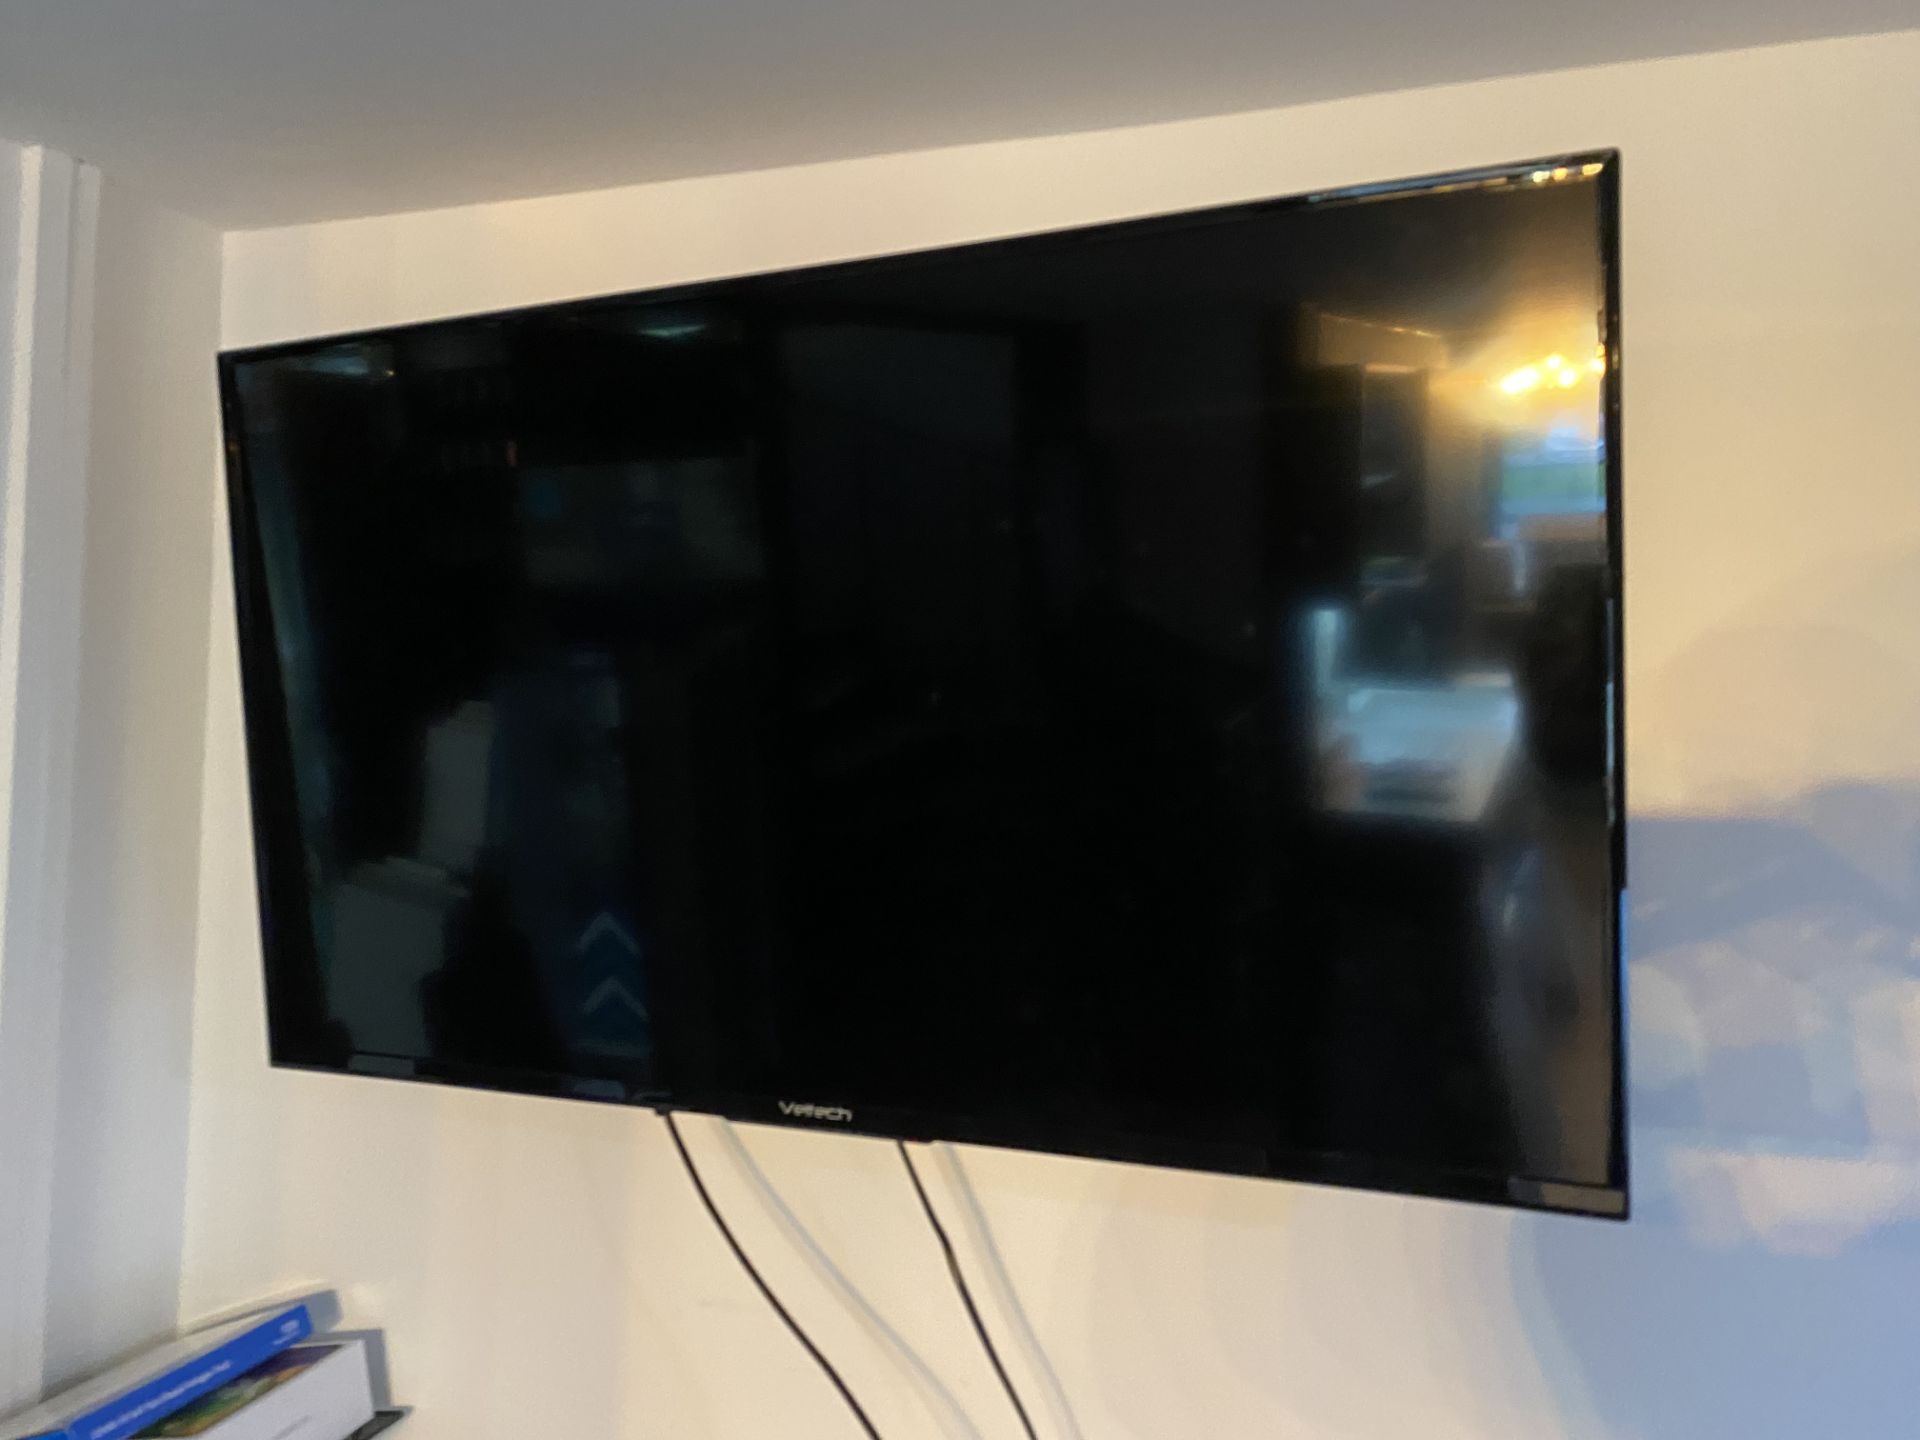 Large V-Tech flat screen Television